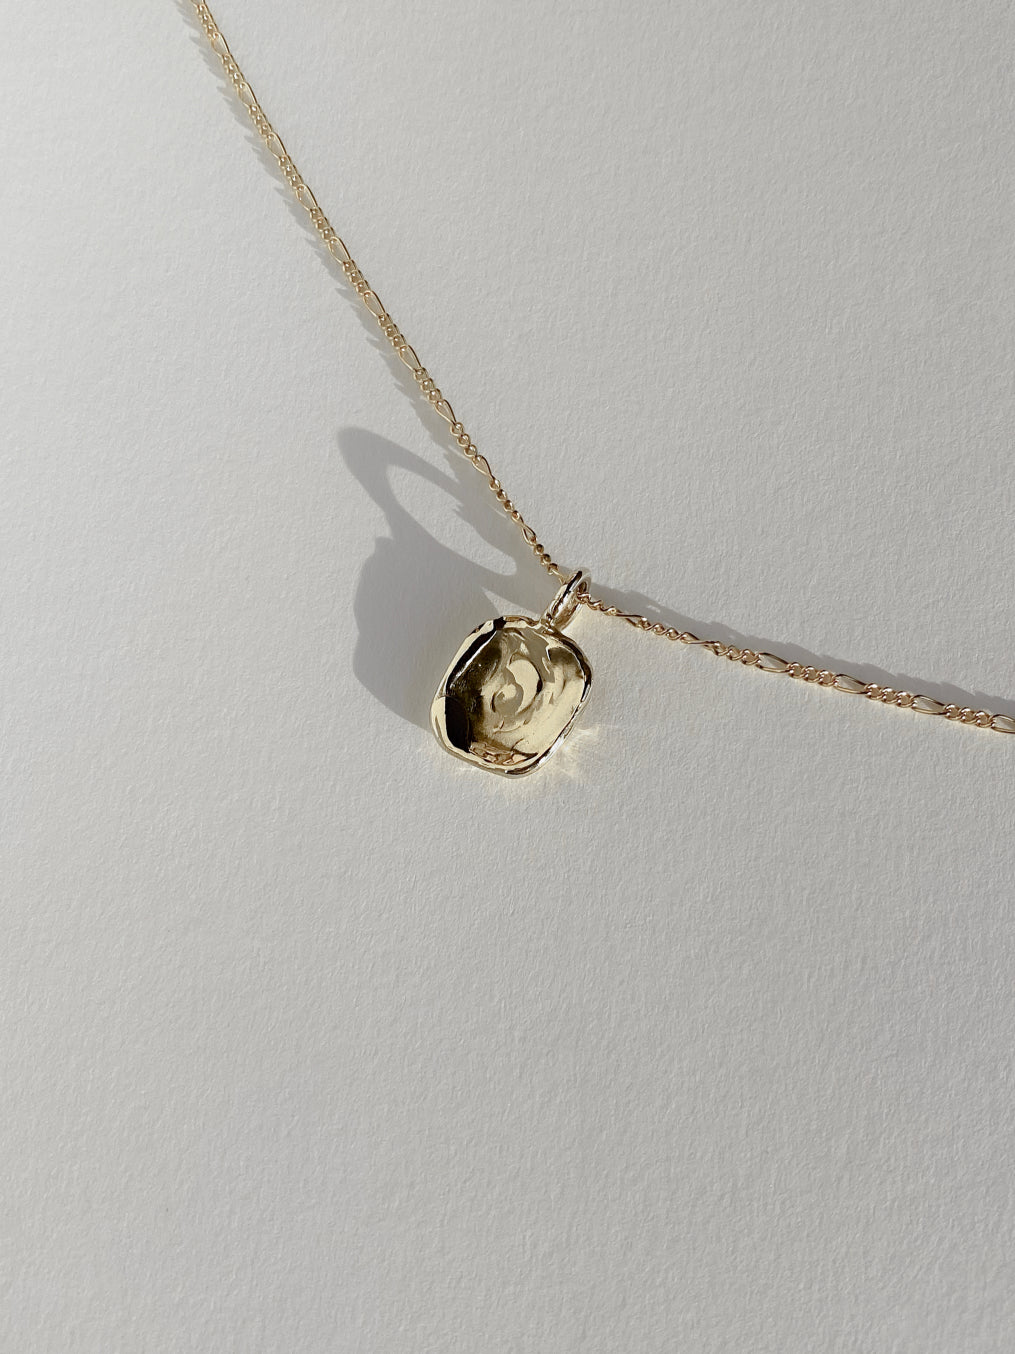 Textured gold molten pendant necklace on white background